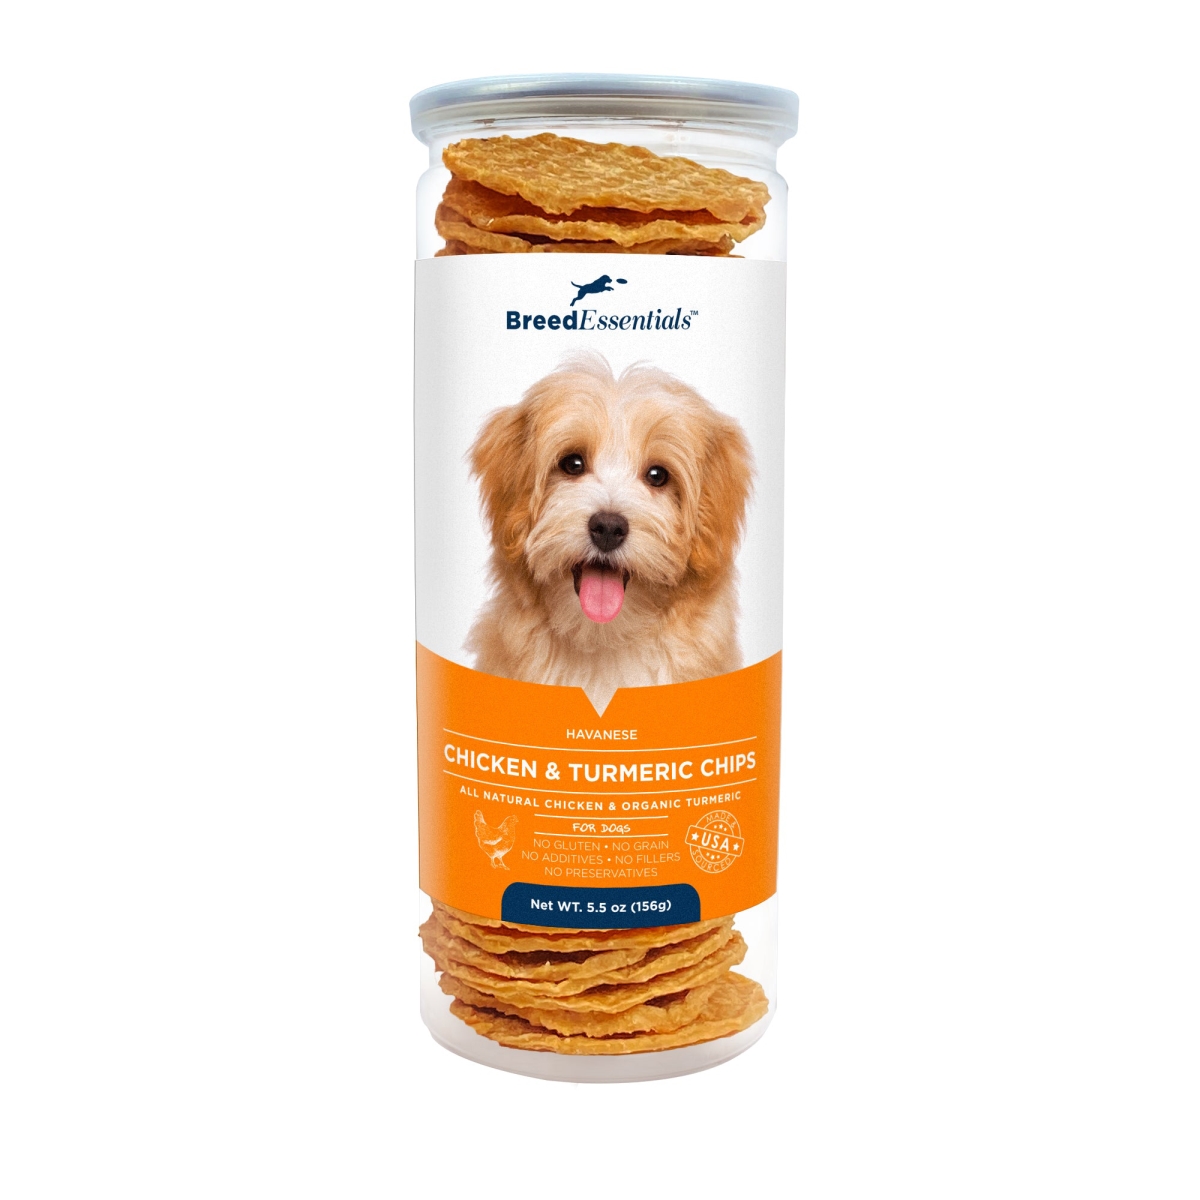 Picture of Breed Essentials 197247000846 5.5 oz Chicken & Turmeric Chips - Havanese